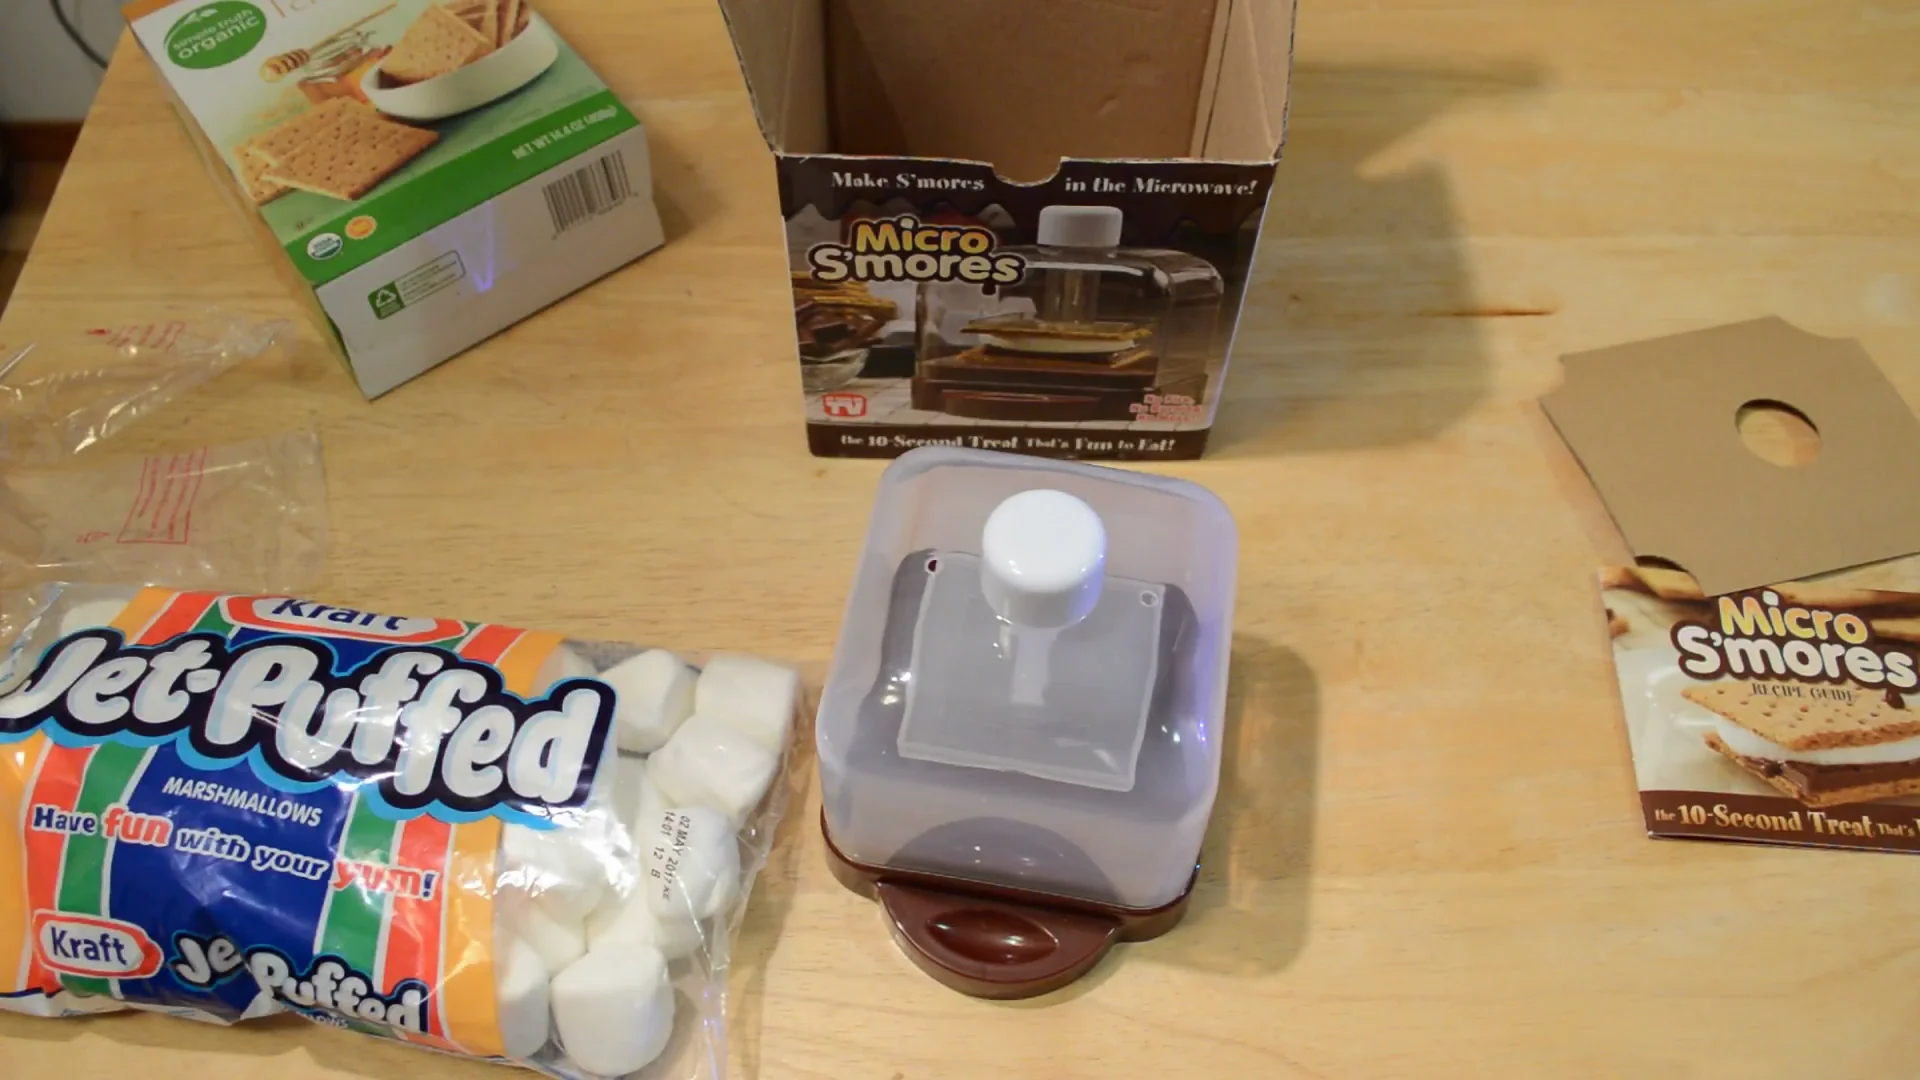 As Seen On TV Micro S'mores Maker Review on Vimeo